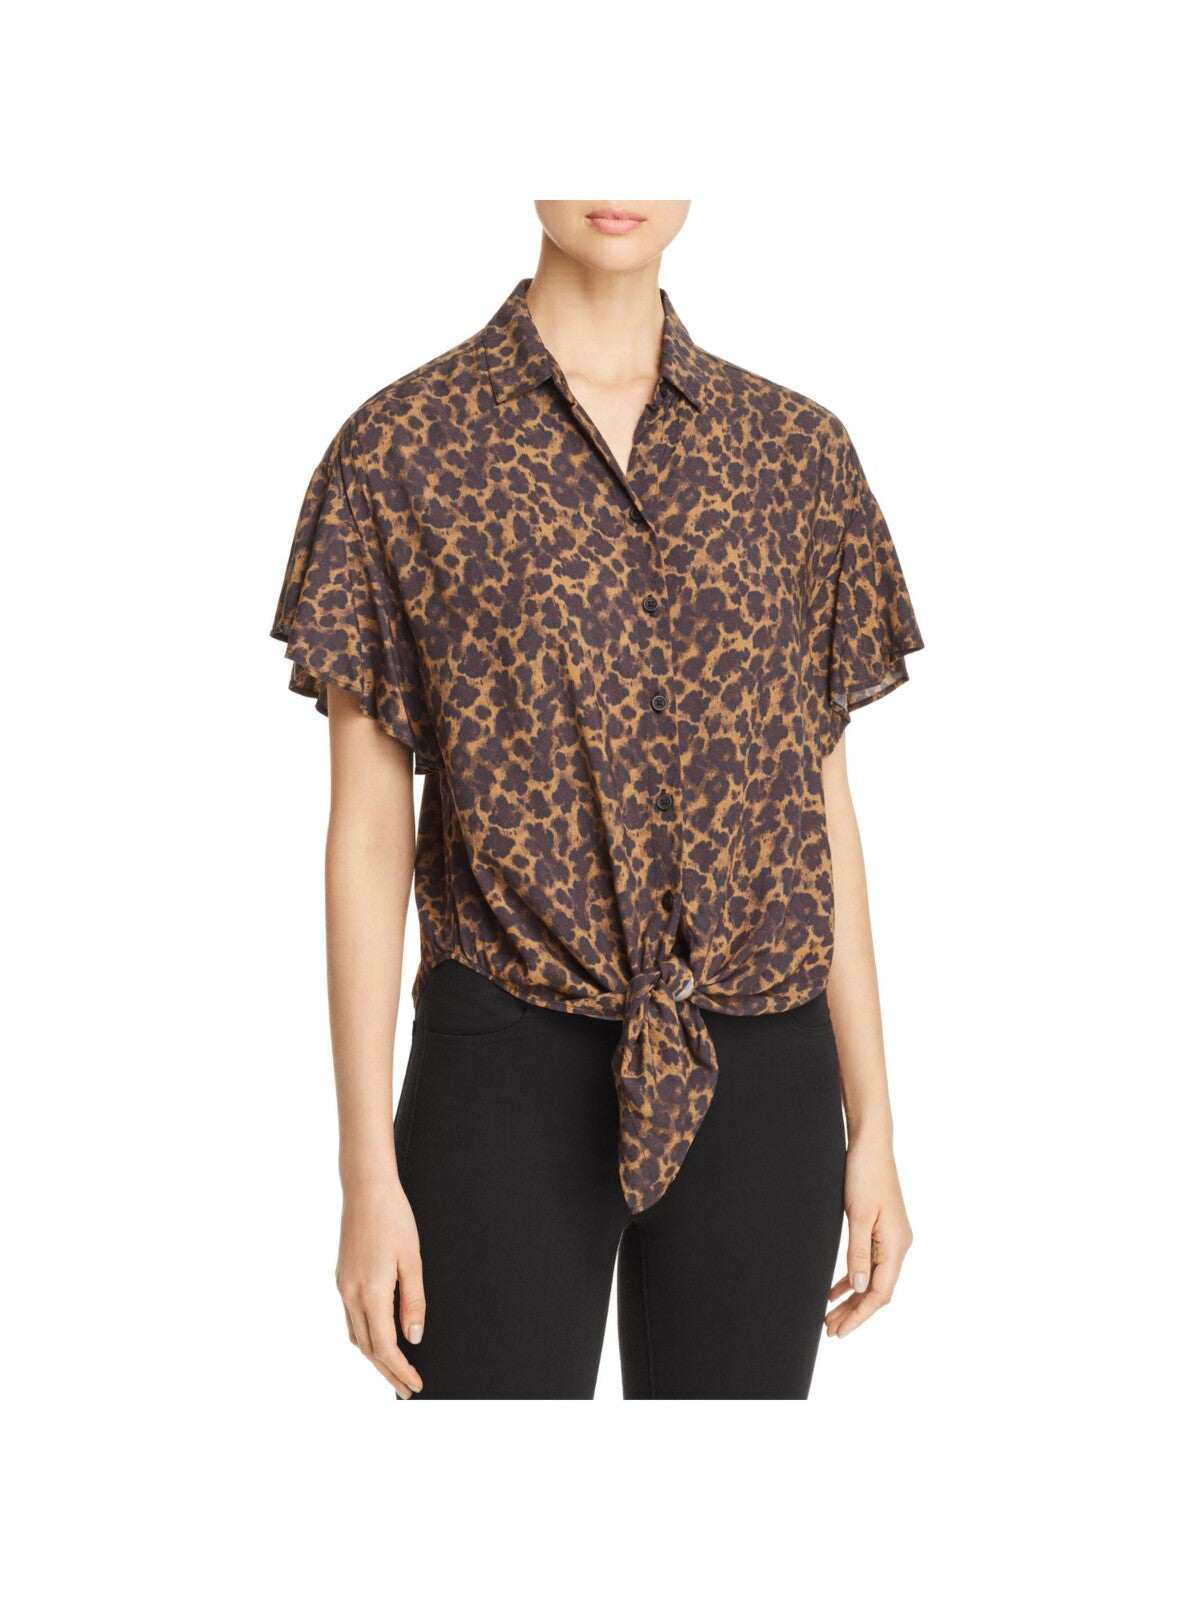 BEACHLUNCHLOUNGE COLLECTION Womens Brown Pleated Tie Front Animal Print Flutter Sleeve Collared Button Up Top XS